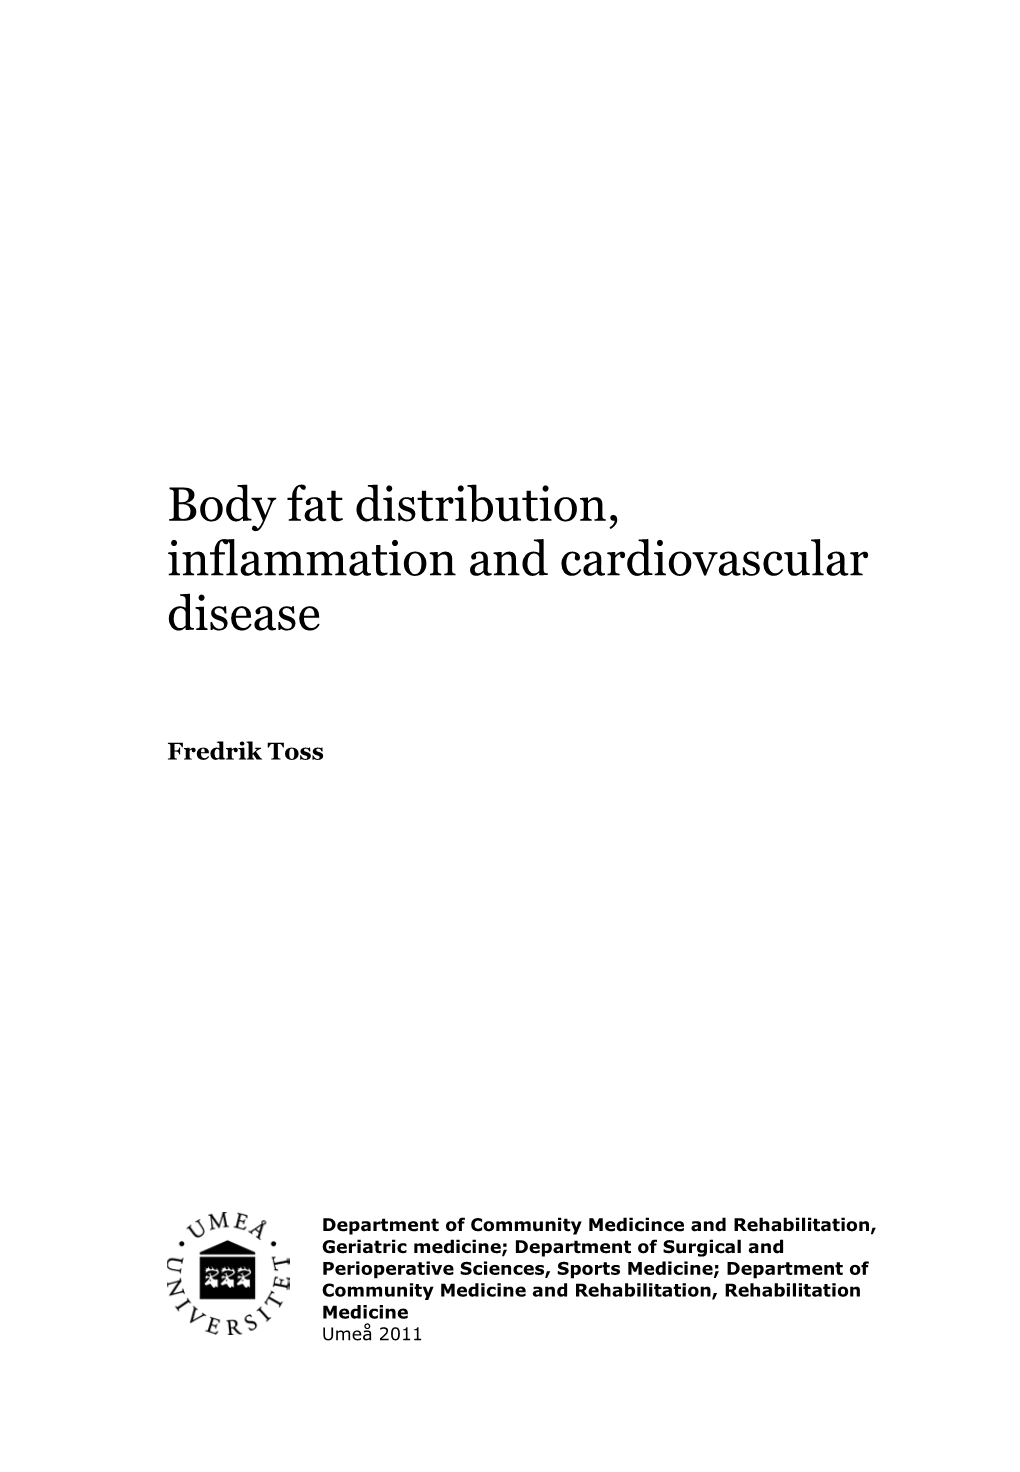 Body Fat Distribution, Inflammation and Cardiovascular Disease